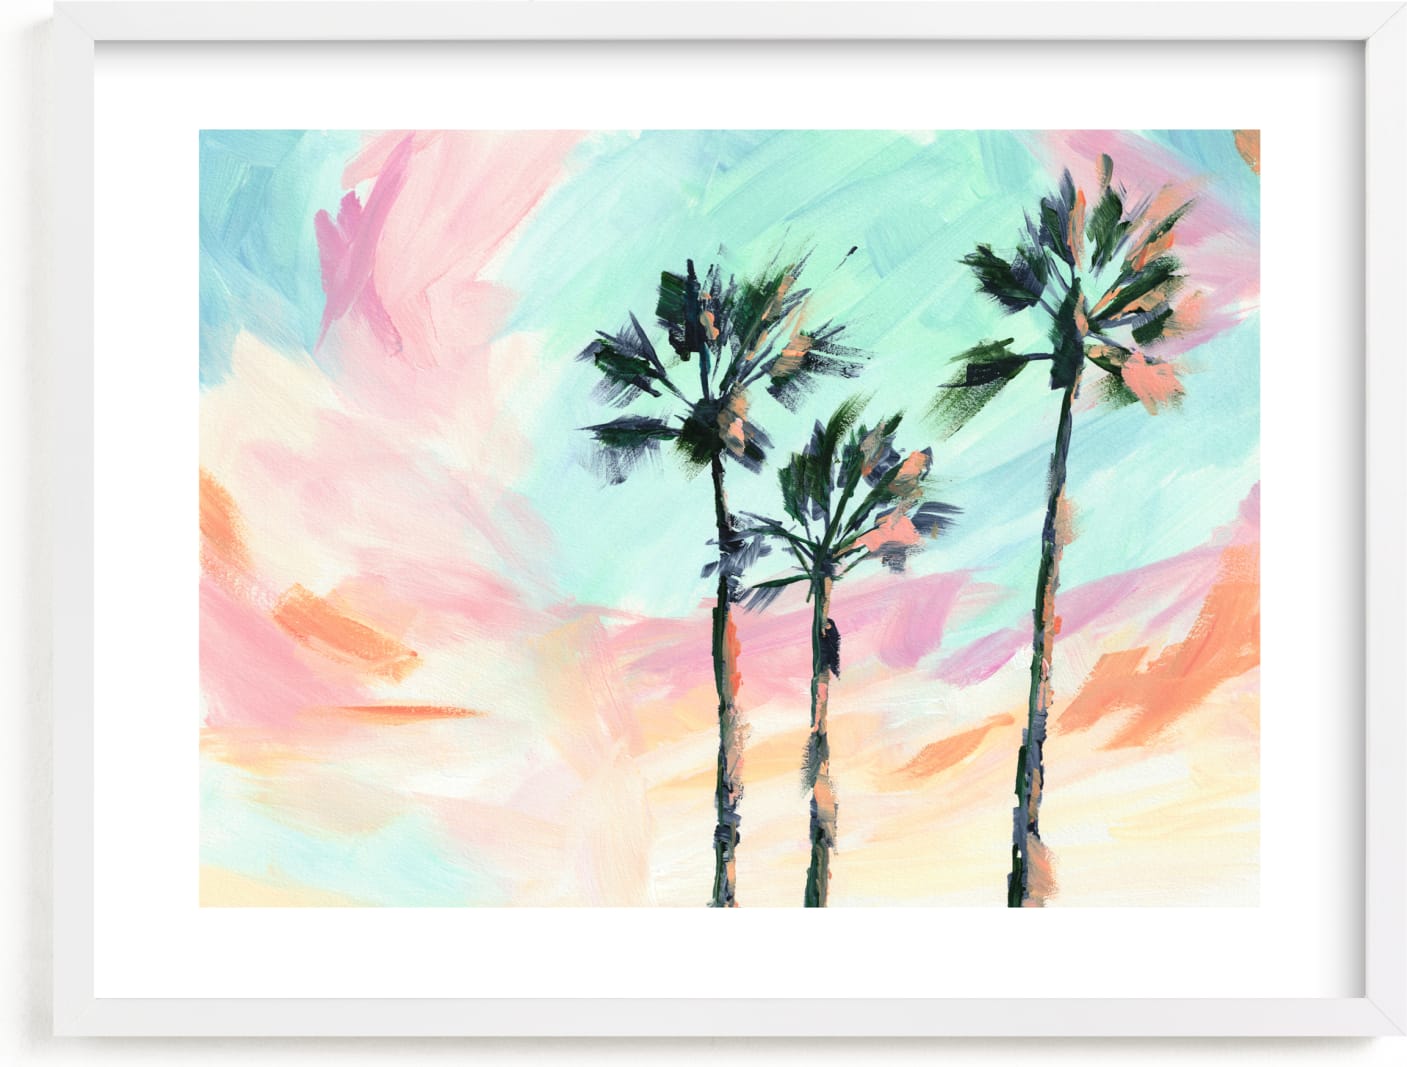 This is a blue, pink, orange art by Holly Whitcomb called Ocean Avenue.